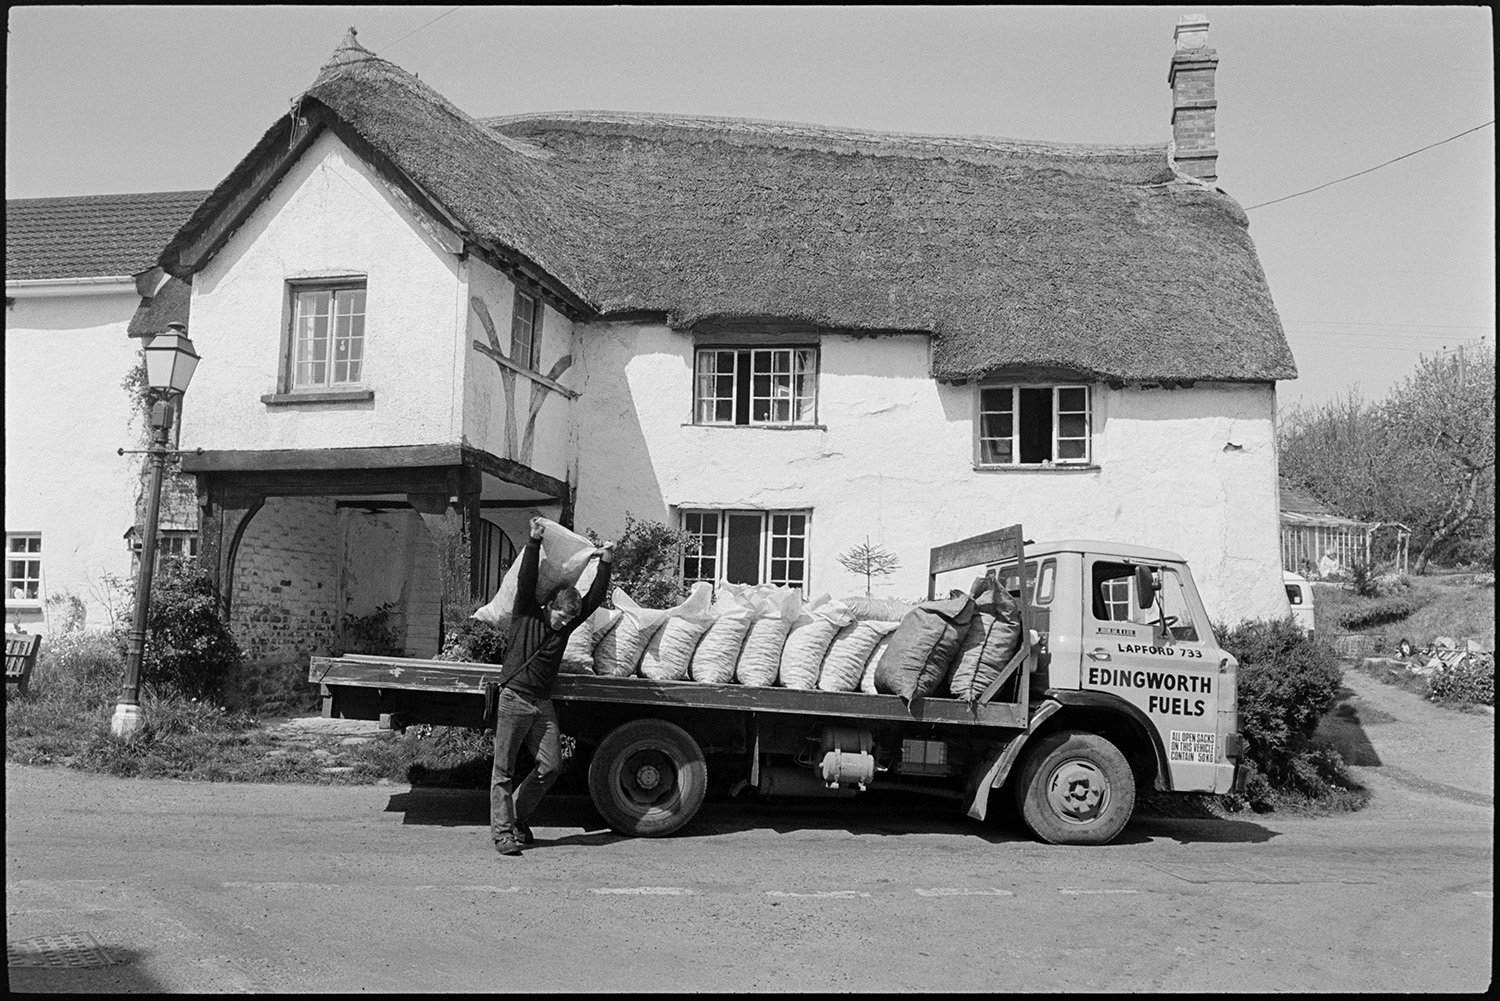 An Edingworth Fuels lorry parked by a thatched house with a lamp and a porch,  at Coleford.  A man is carrying and delivering sacks of coal from the lorry.